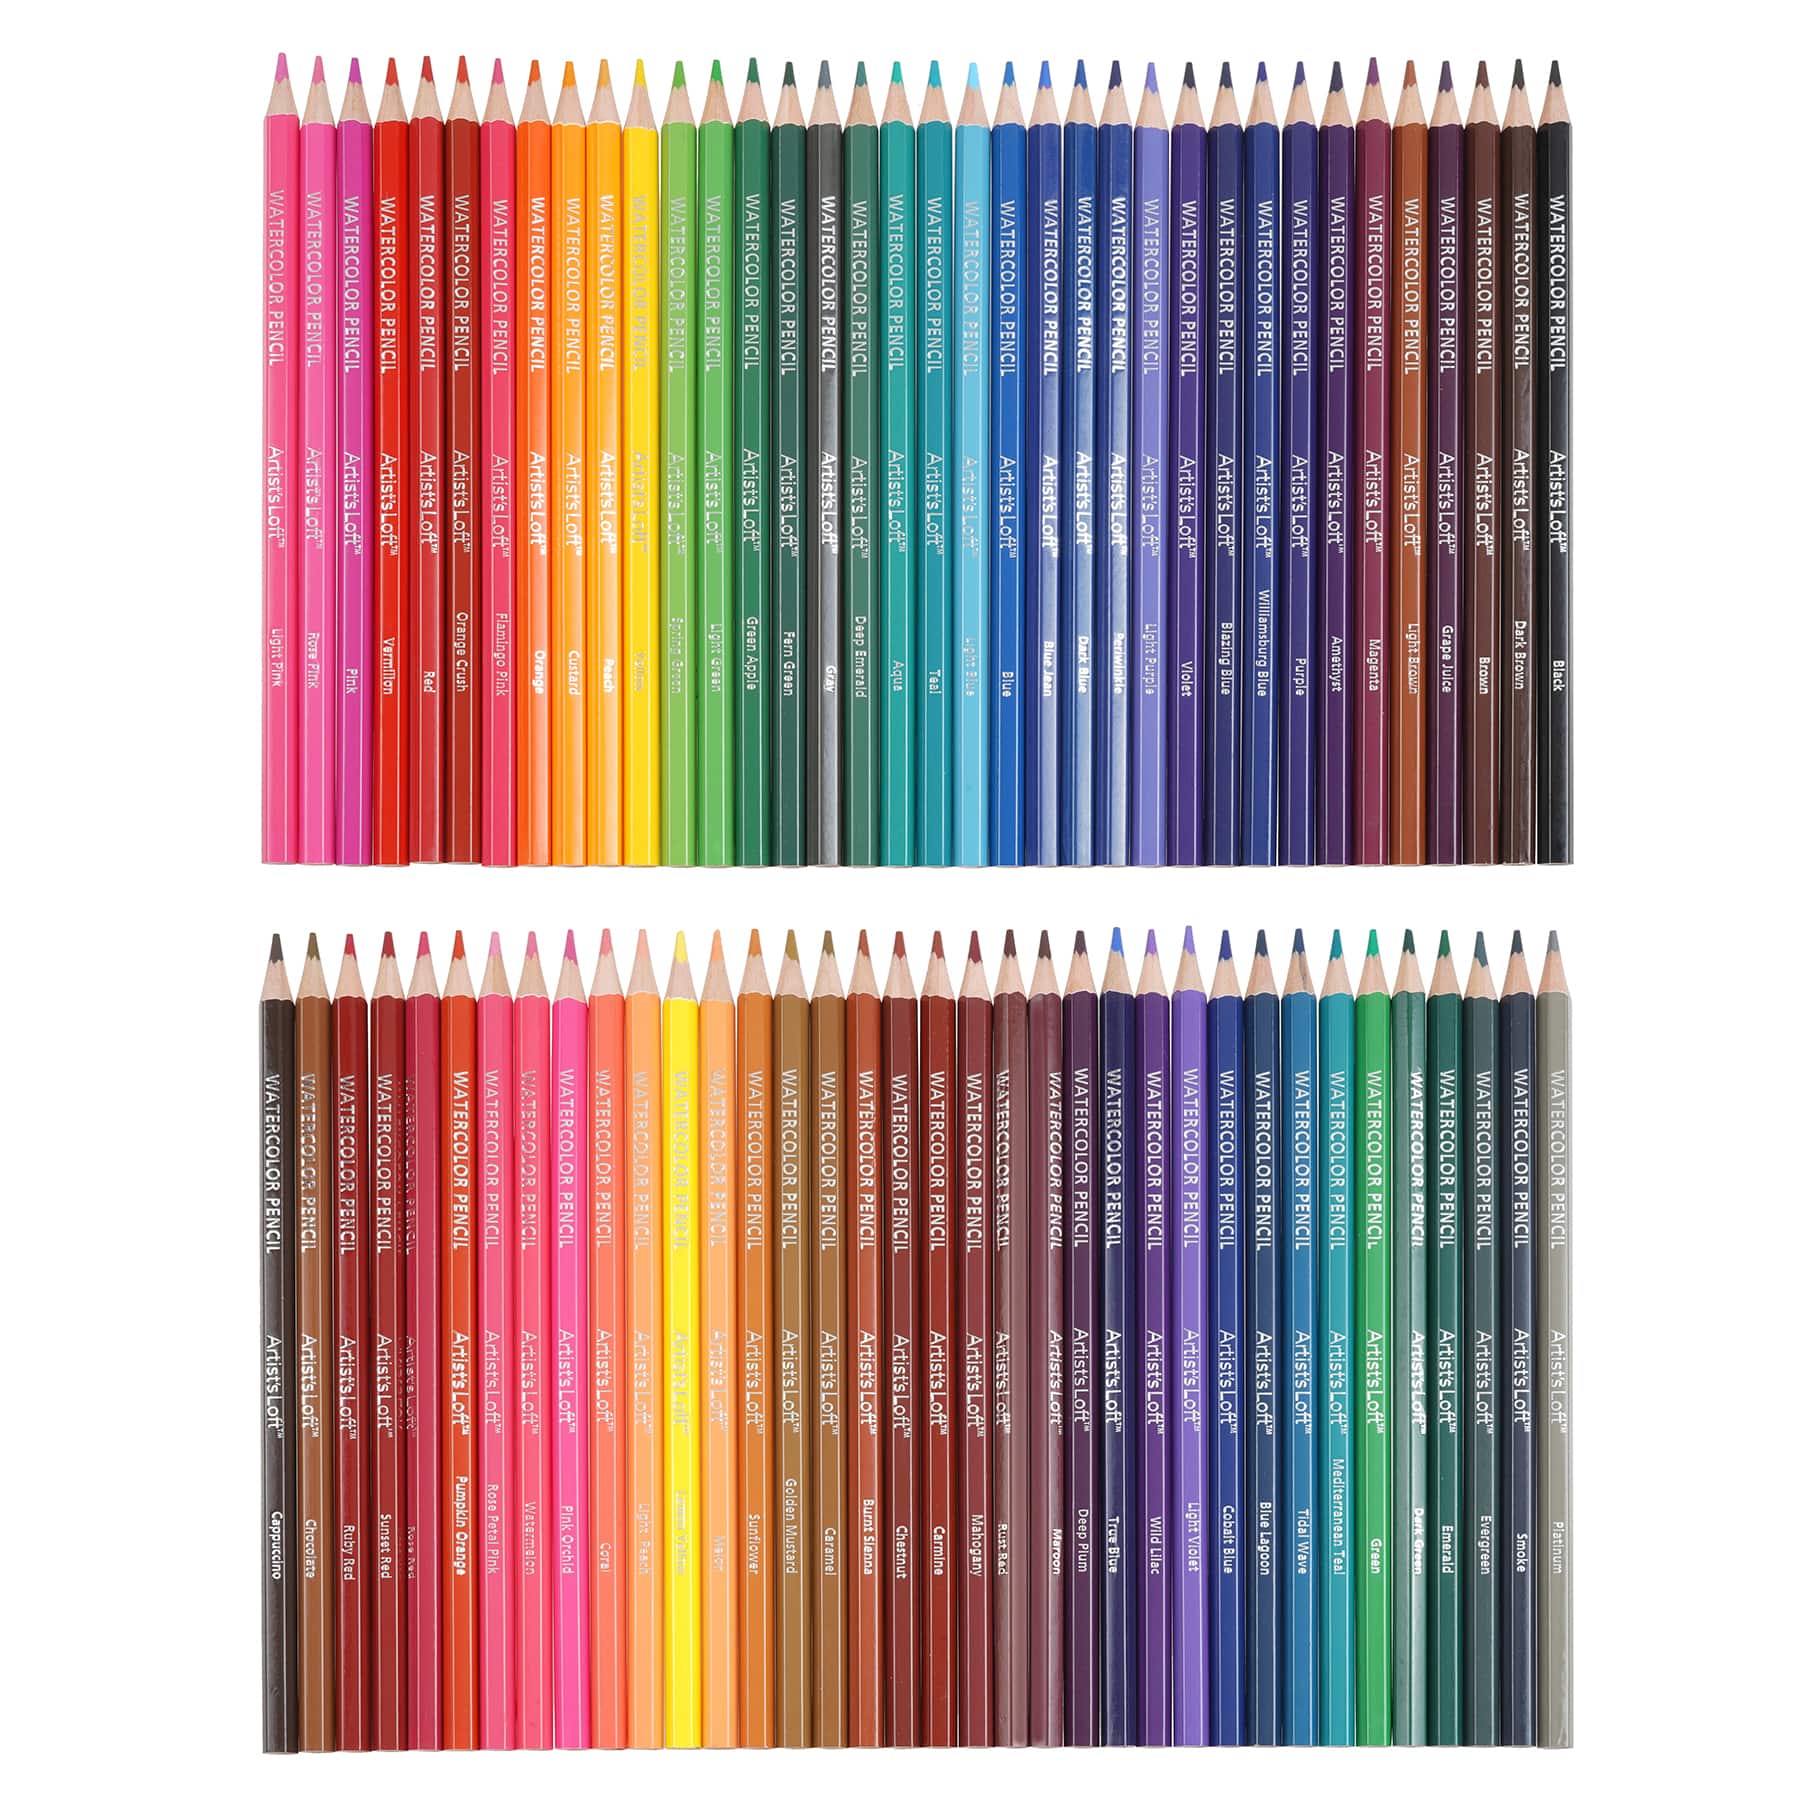 6 Packs: 72 ct. (432 total) Colored Pencils by Artist's Loft™ 